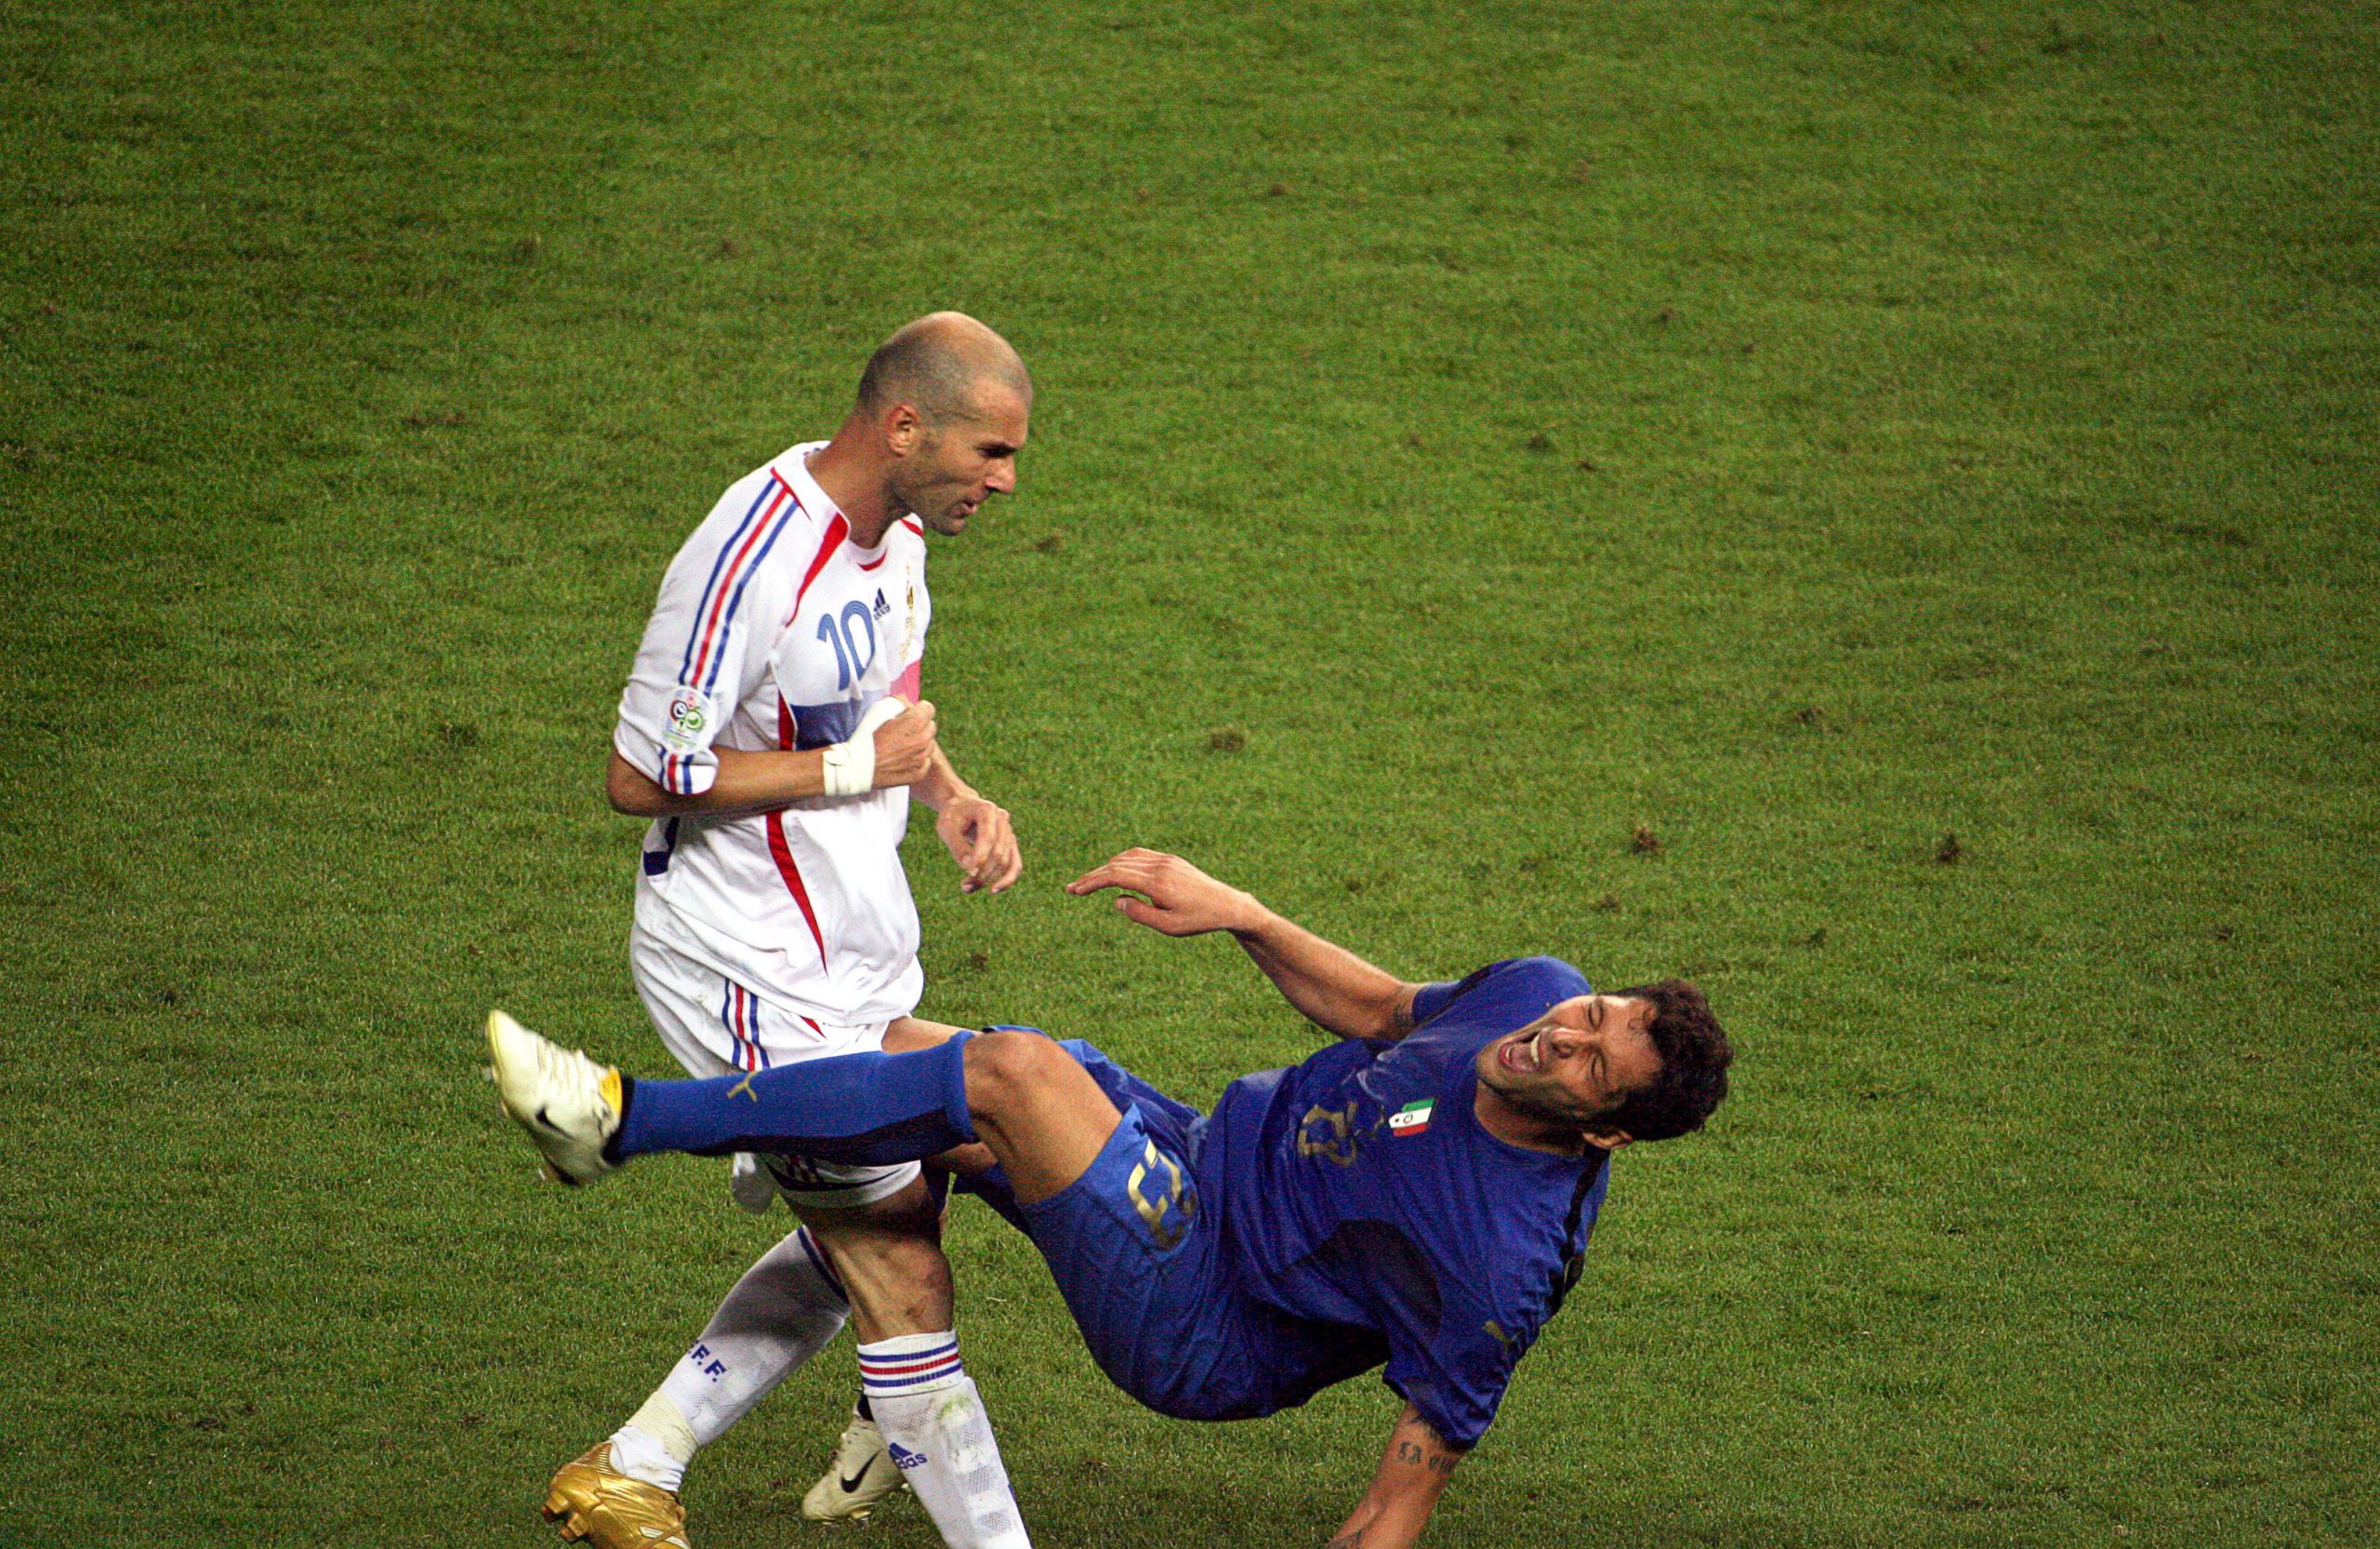 On this day: Zidanes iconic headbutt on Materazzi in 2006 World Cup final